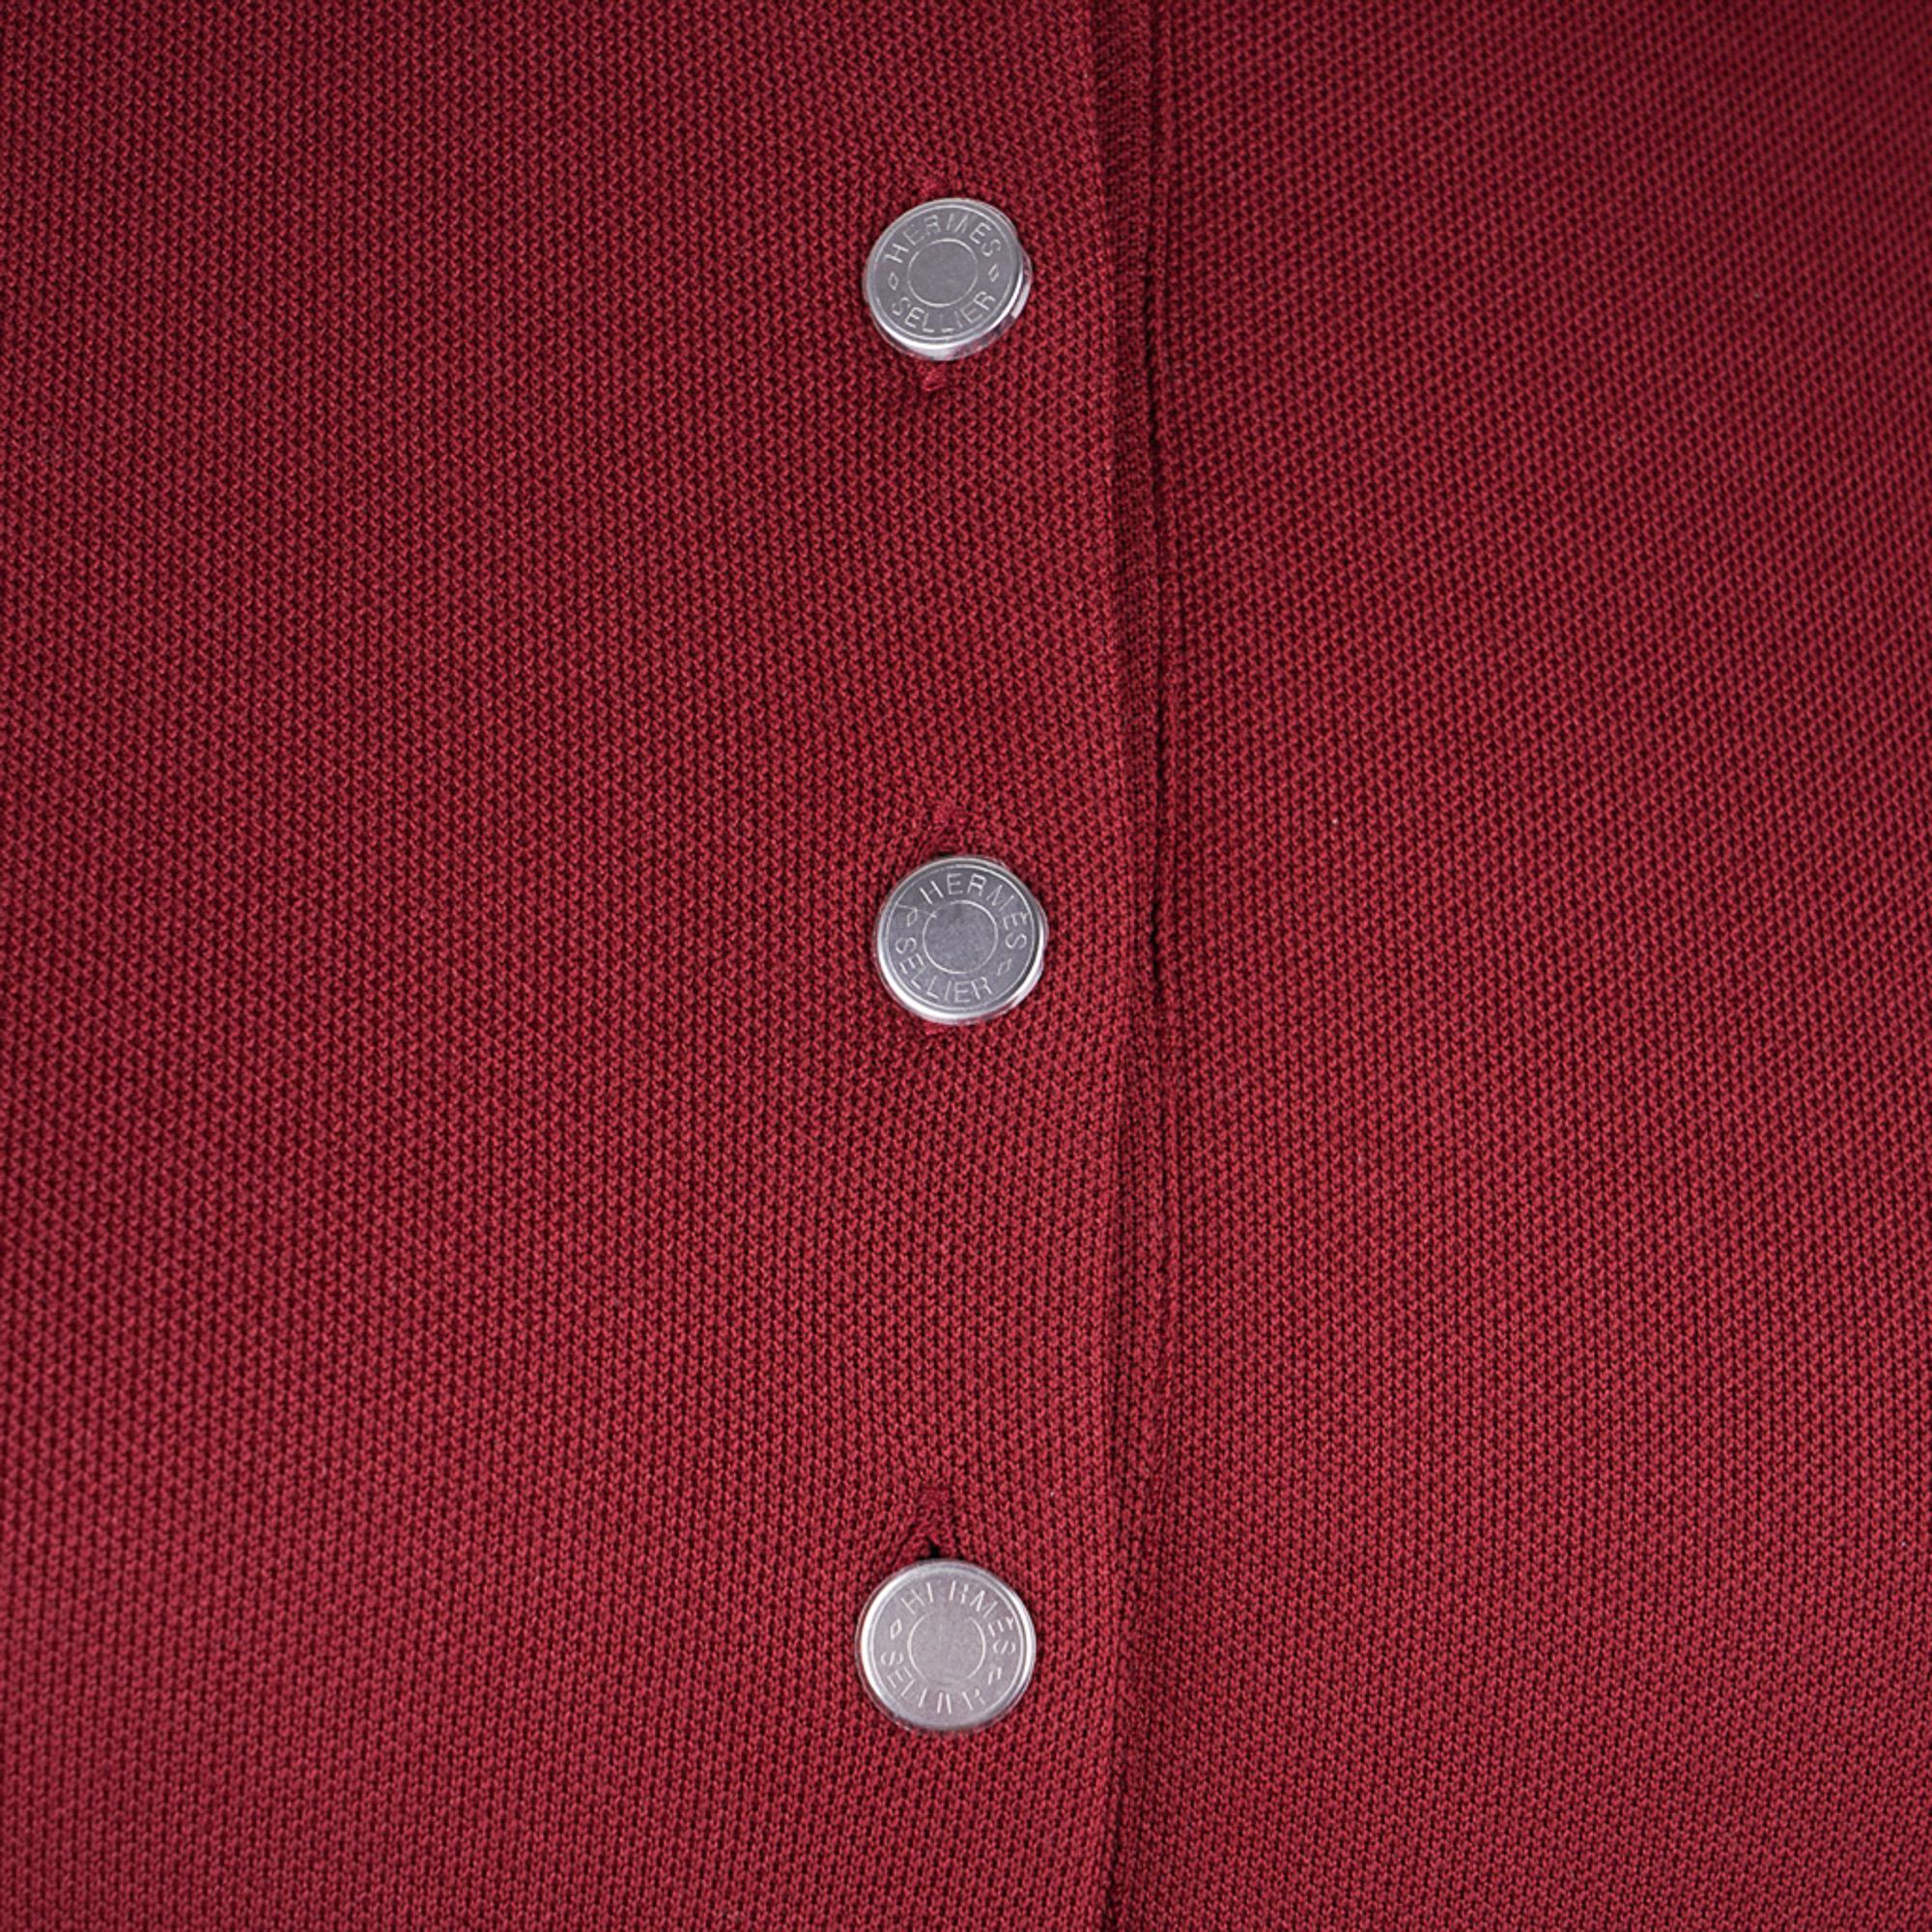 Mightychic offers a guaranteed authentic Hermes Double Jeu Technical Polo featured in Rouge H with Navy Trim.
Part of the Equestrian Collection.
4 Clou de Selle buttons.
Polo has short sleeve with straight fit and stretchy, breathable